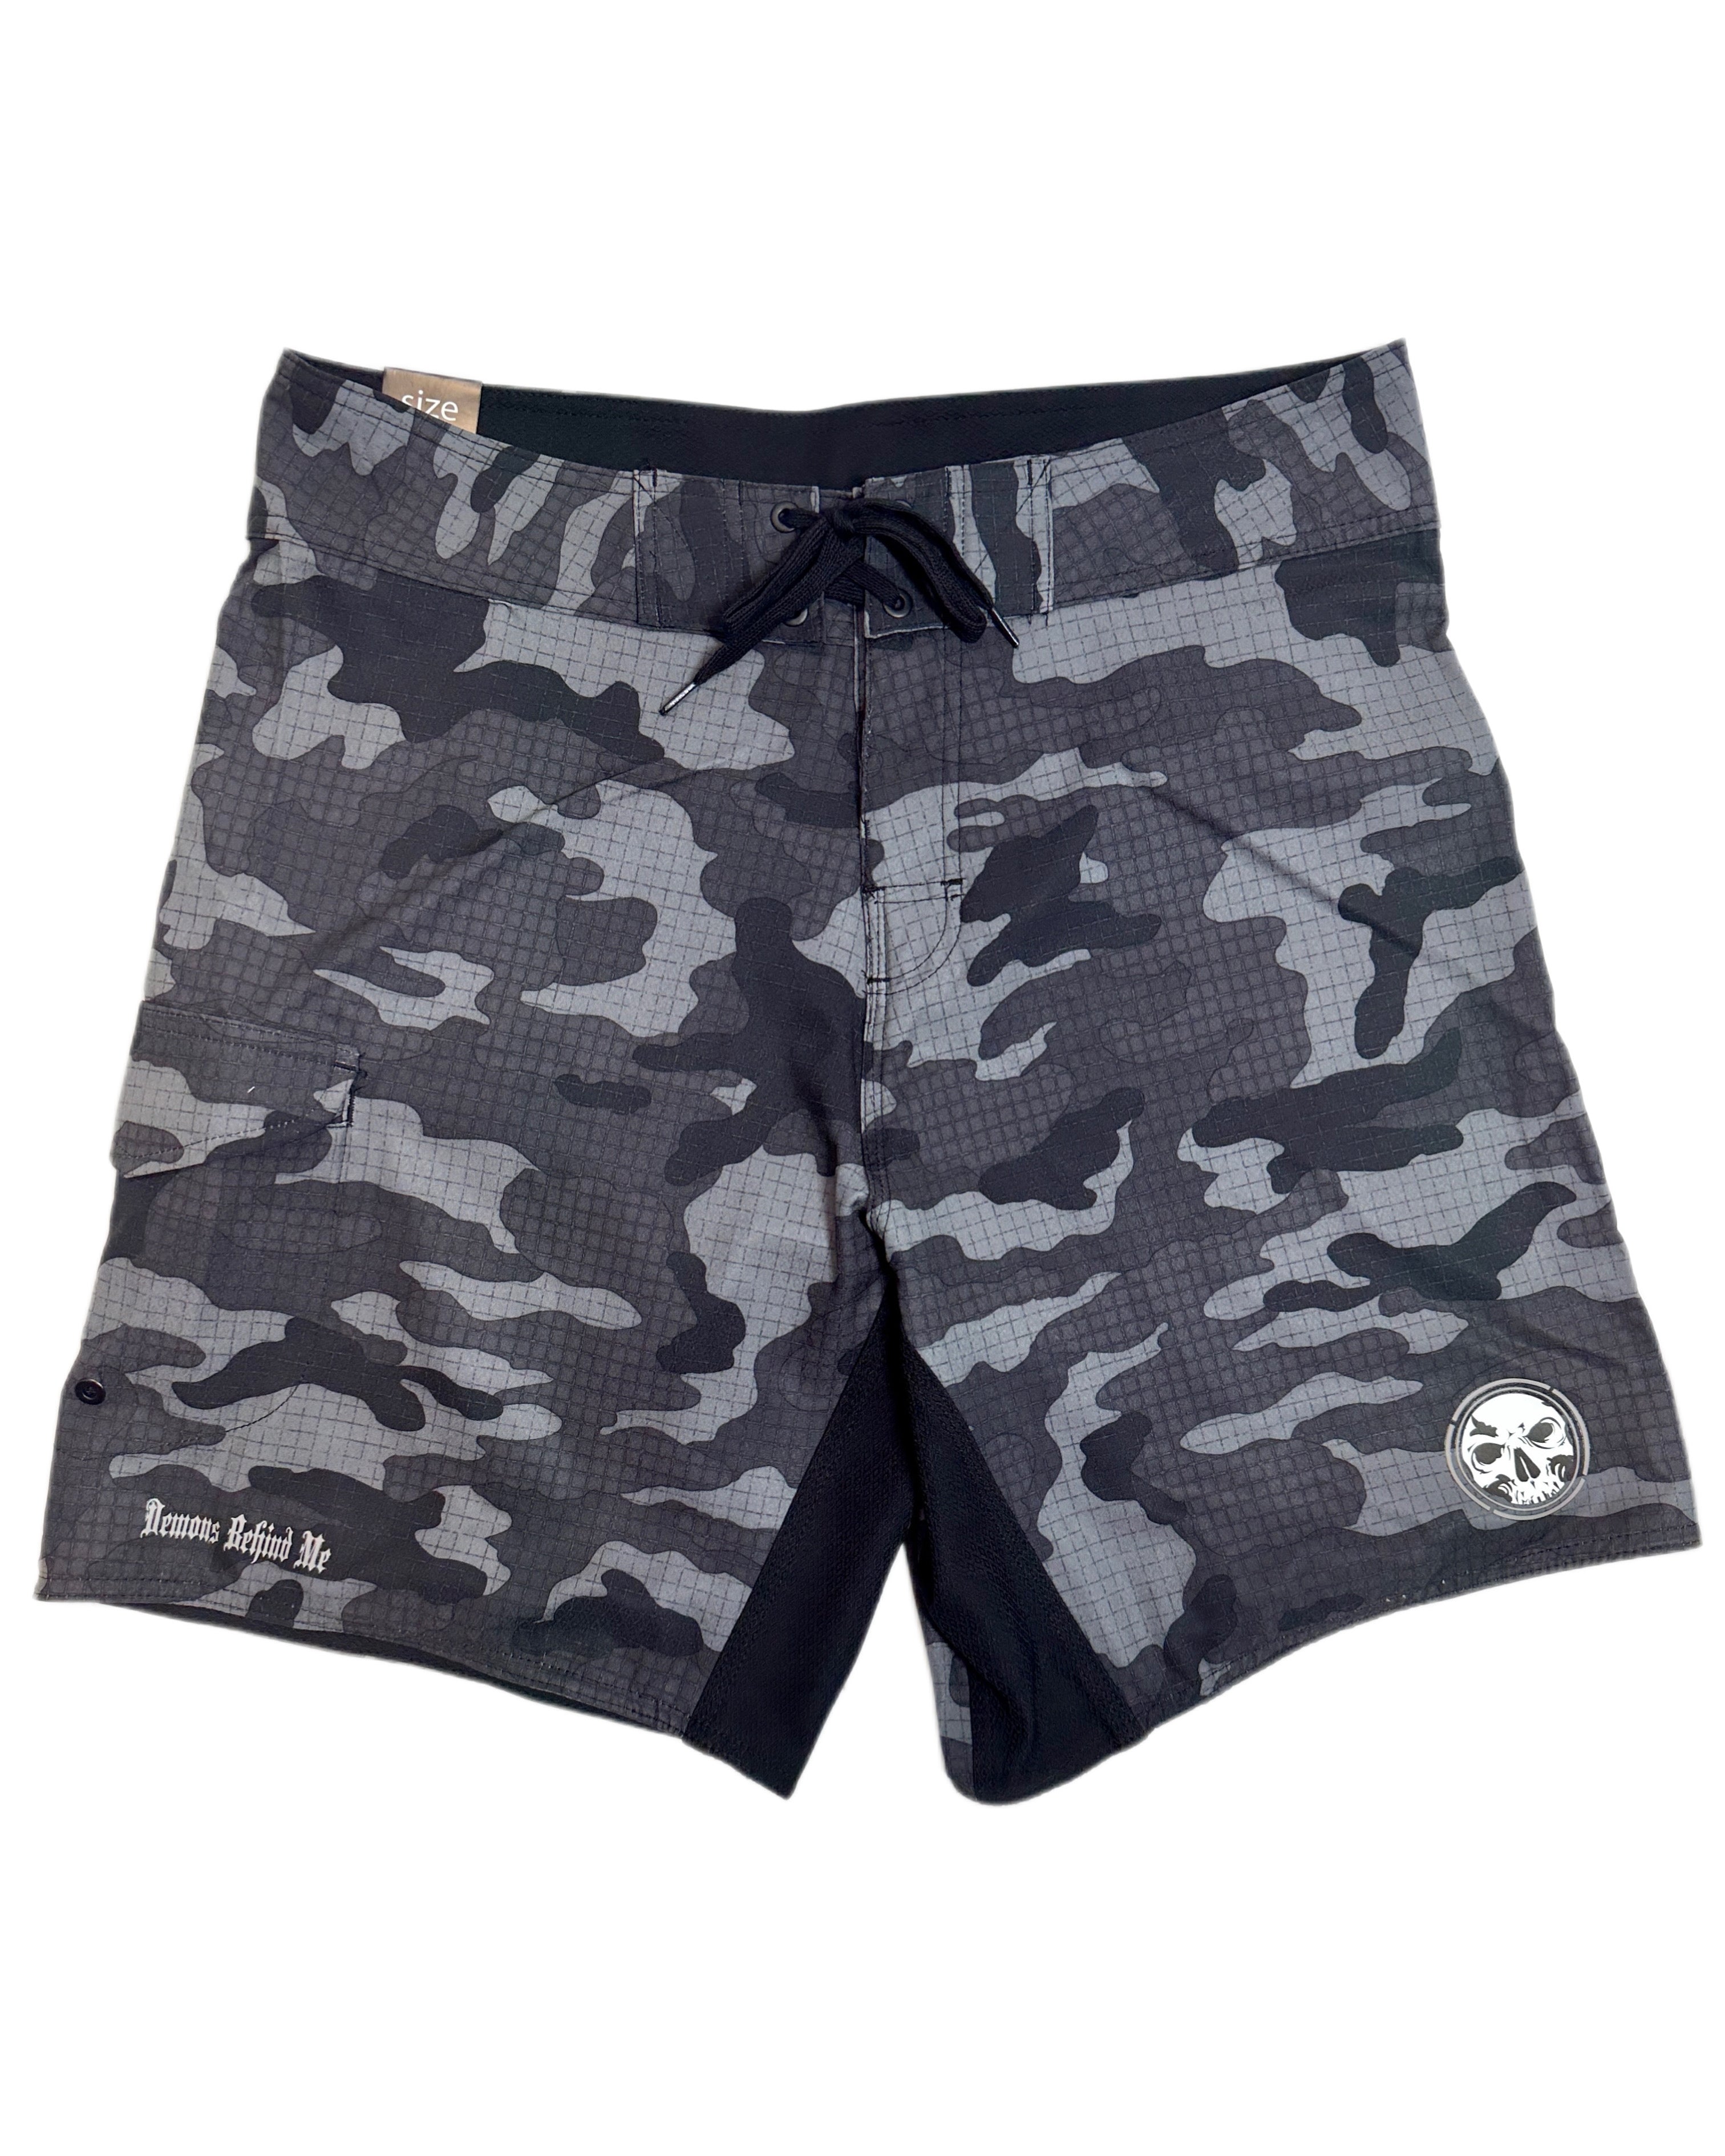 NEW! Black Camo Stretch Board Shorts – Demons Behind Me | Inspirational ...